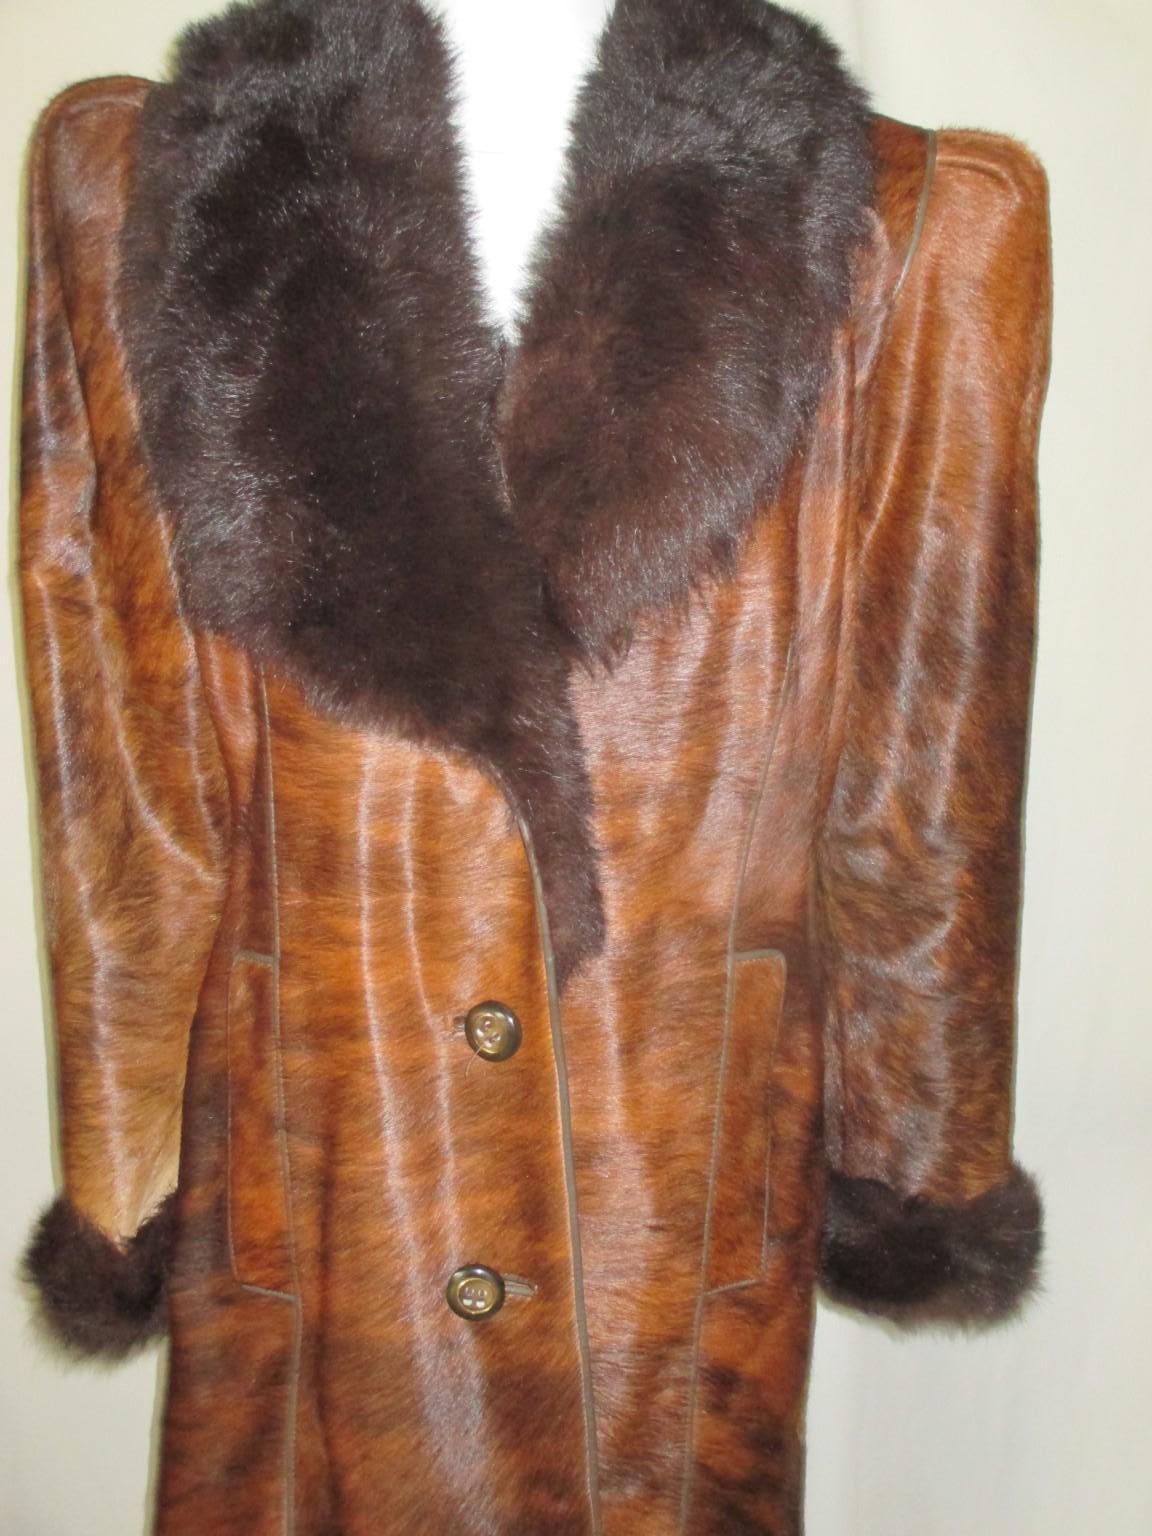 Amazing vintage hand made coat from pony skin/cowhide with lamb fur collar, cuffs and statement shoulders.

We offer more luxurious fur items, view our storefront.

Details:
With 2 pockets, 3 buttons, fully lined, leather trimmed.
Designer: Bauza